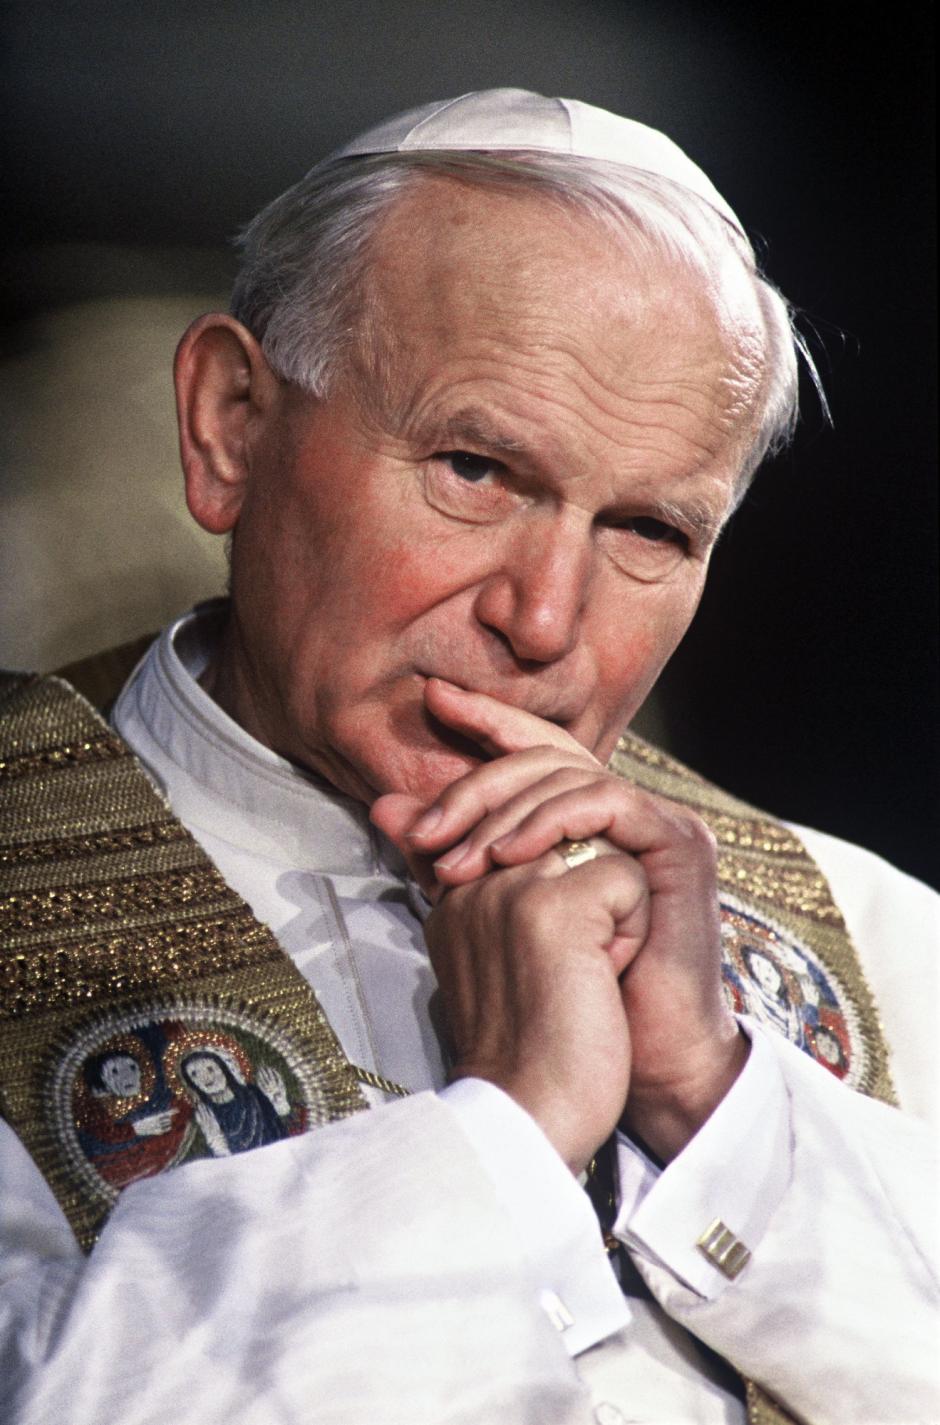 Pope John Paul II on 3 May 1987 in Augsburg. The head of the Catholic Church made his vissit during his 34th Pastoral Visit from 30 4. to 05.04.1987, to Germany. | usage worldwide 
"Religion_and_Belief religions REL" Vatican Religions gesture visit thoughtful travel People Travel_and_Commuting